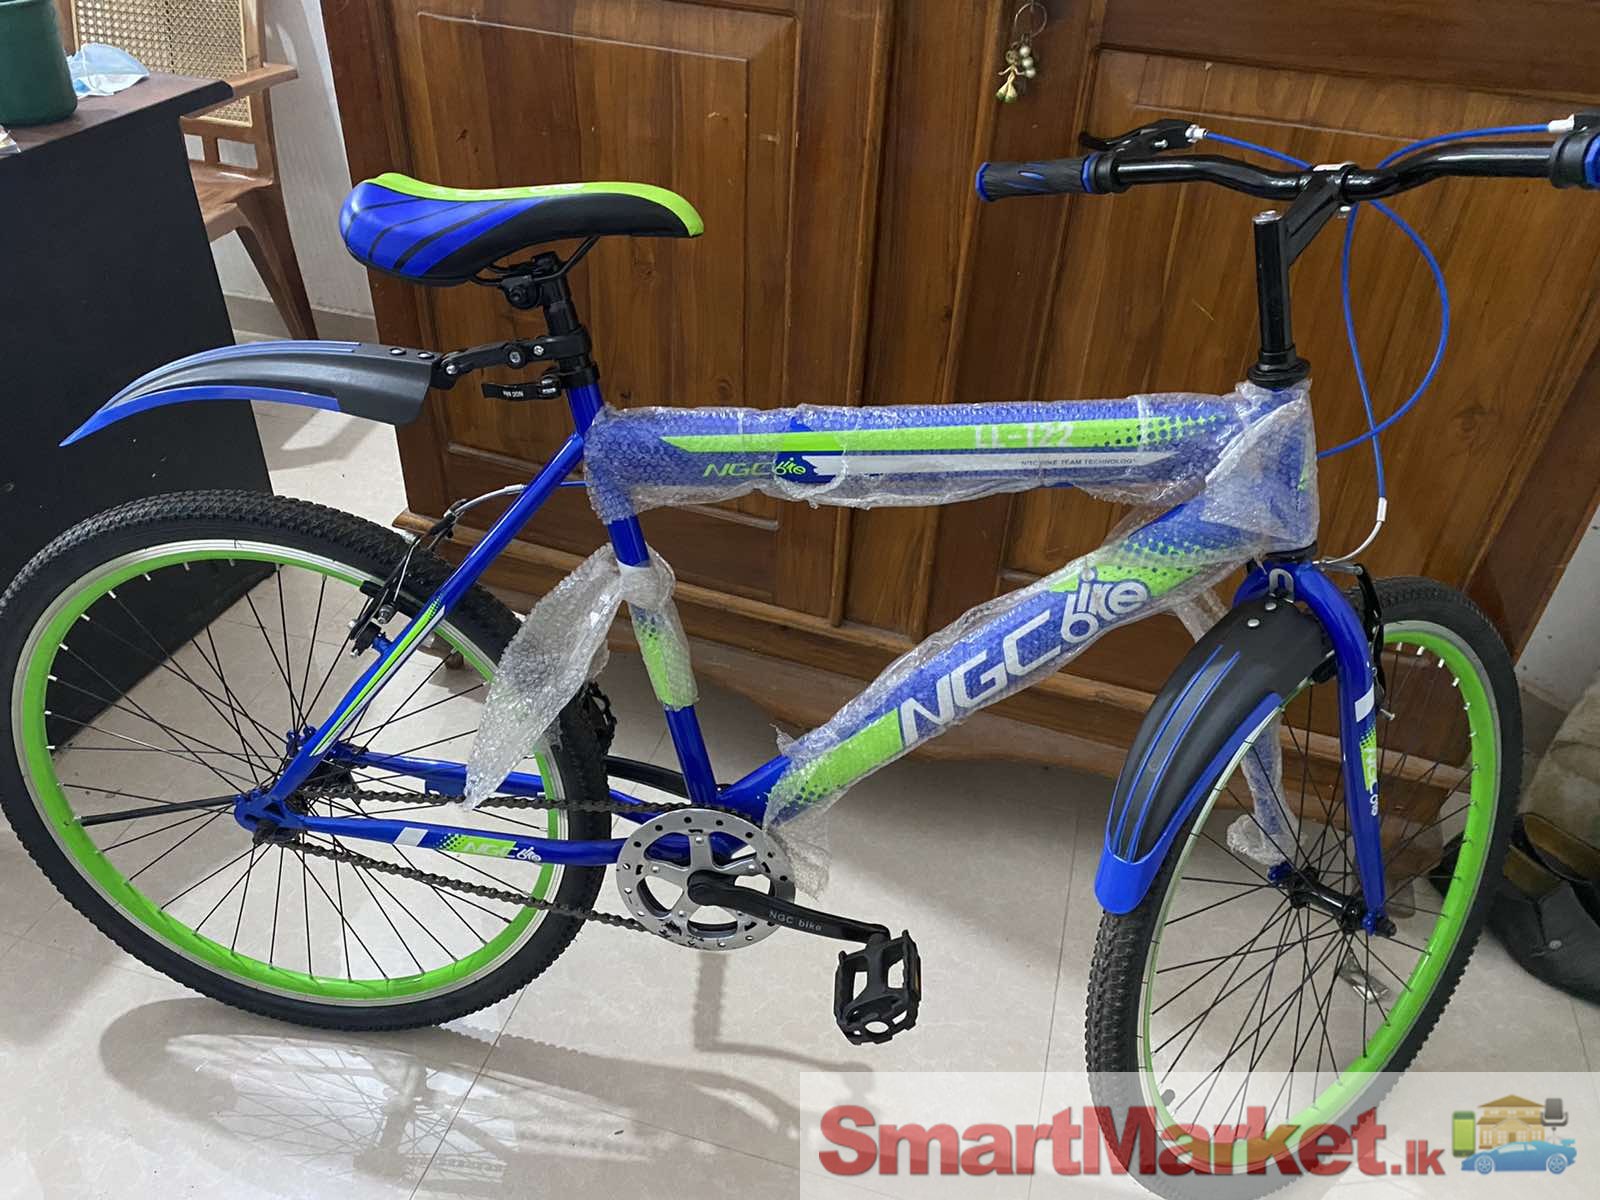 Brand New Bicycle is for Sale